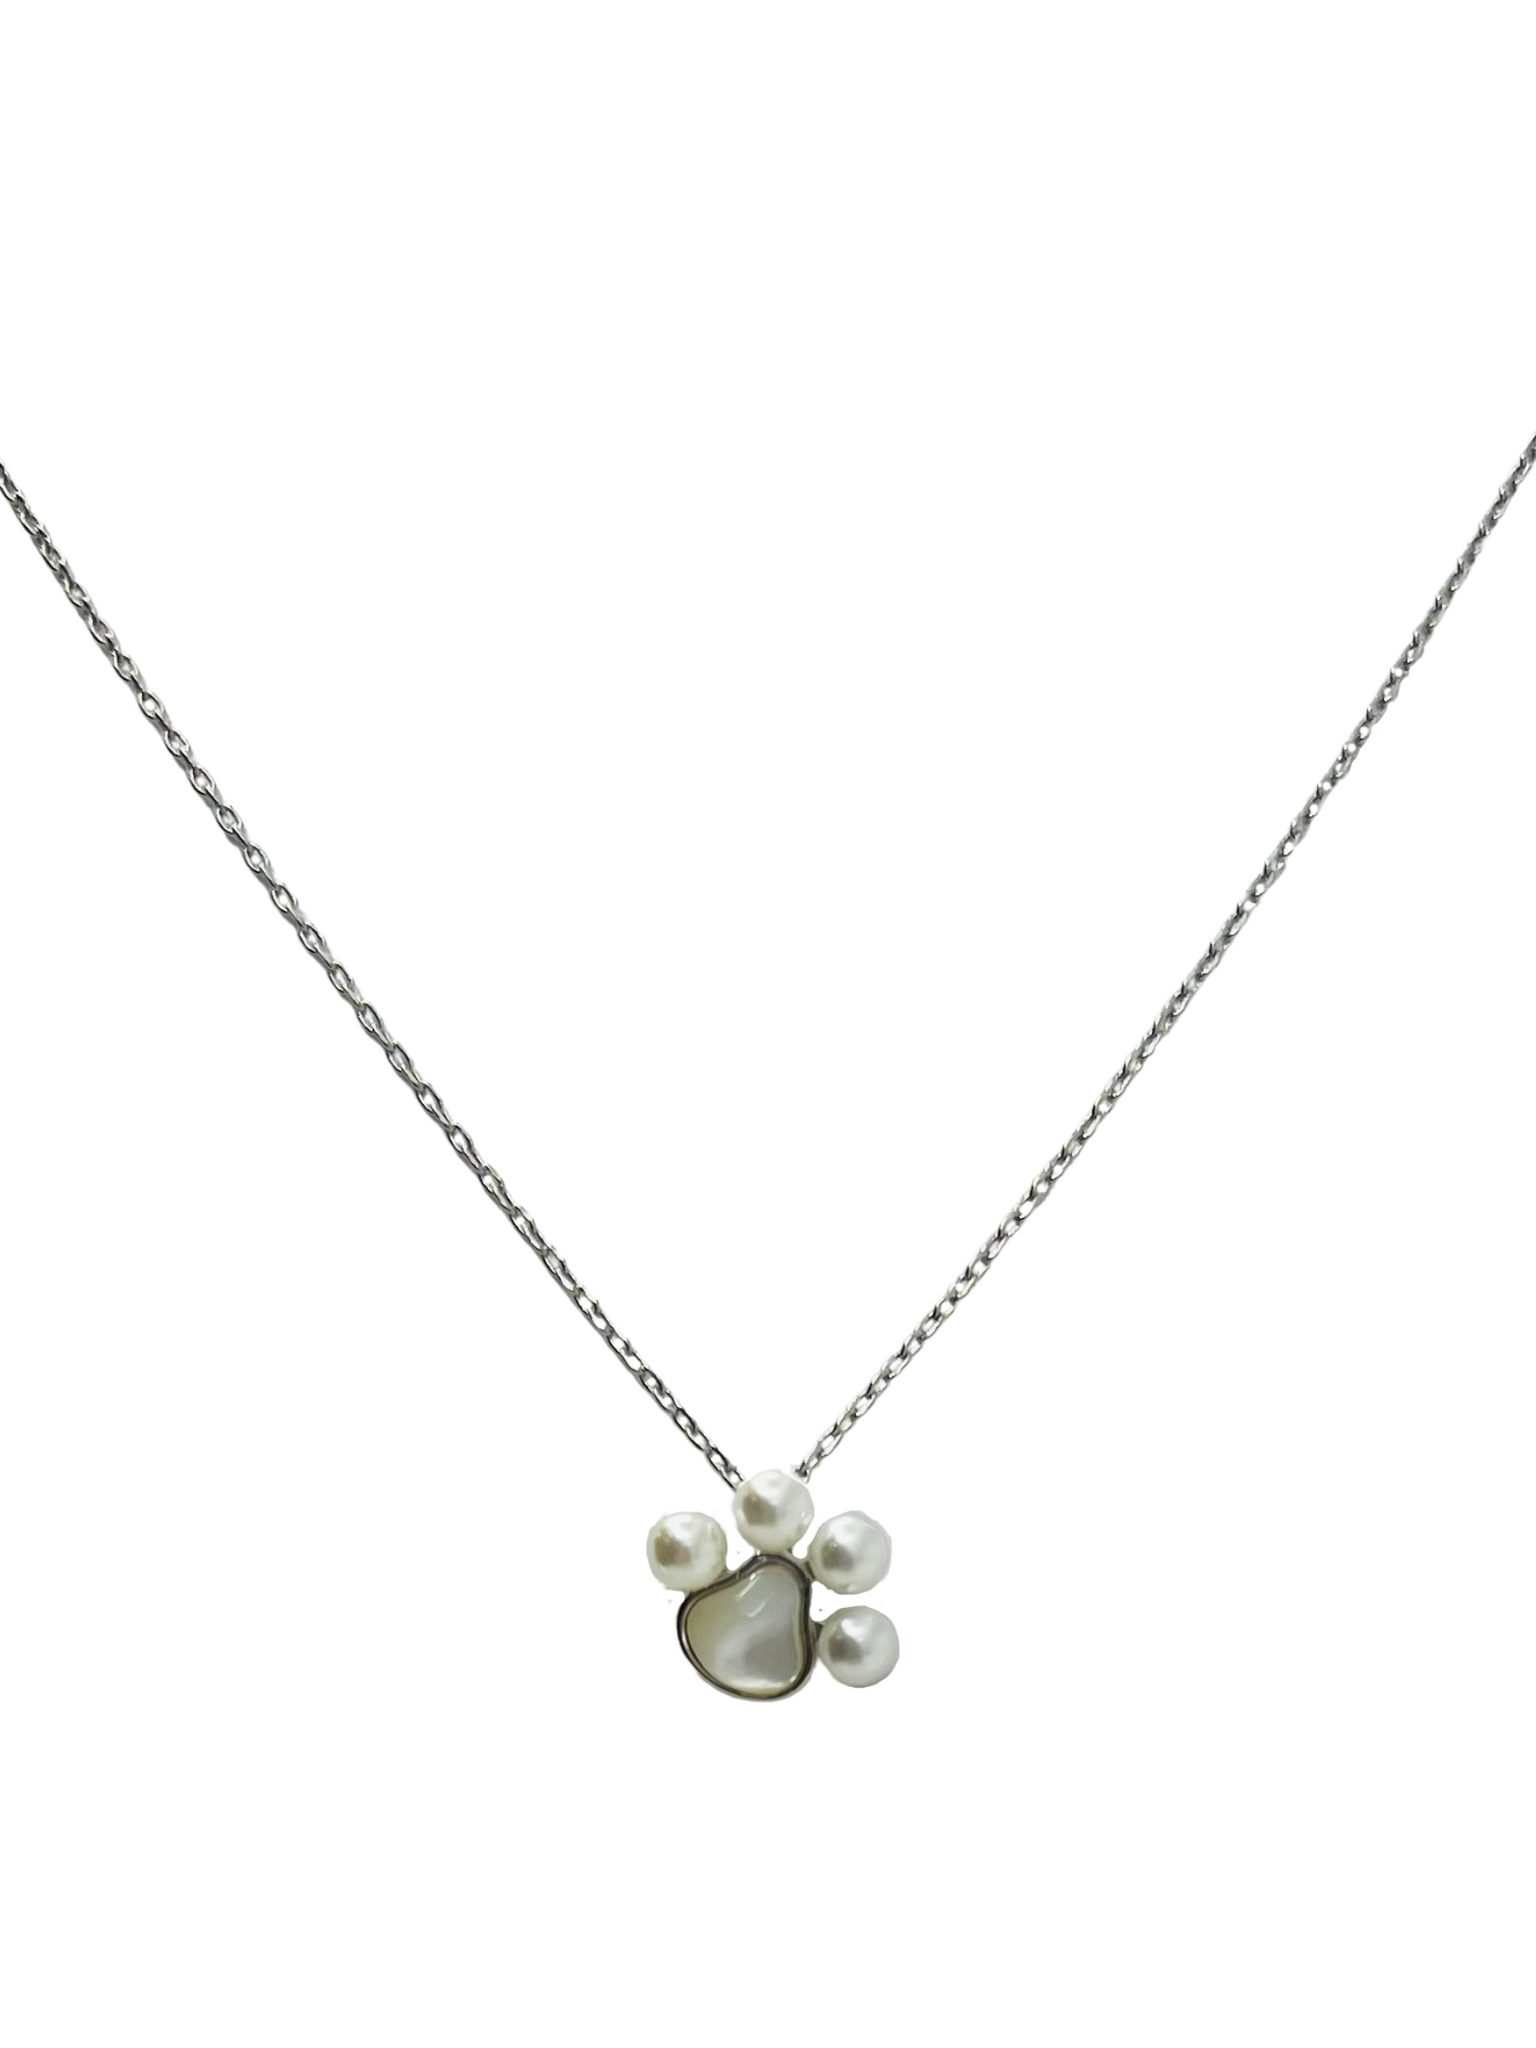 The Pearly Paw Silver Necklace